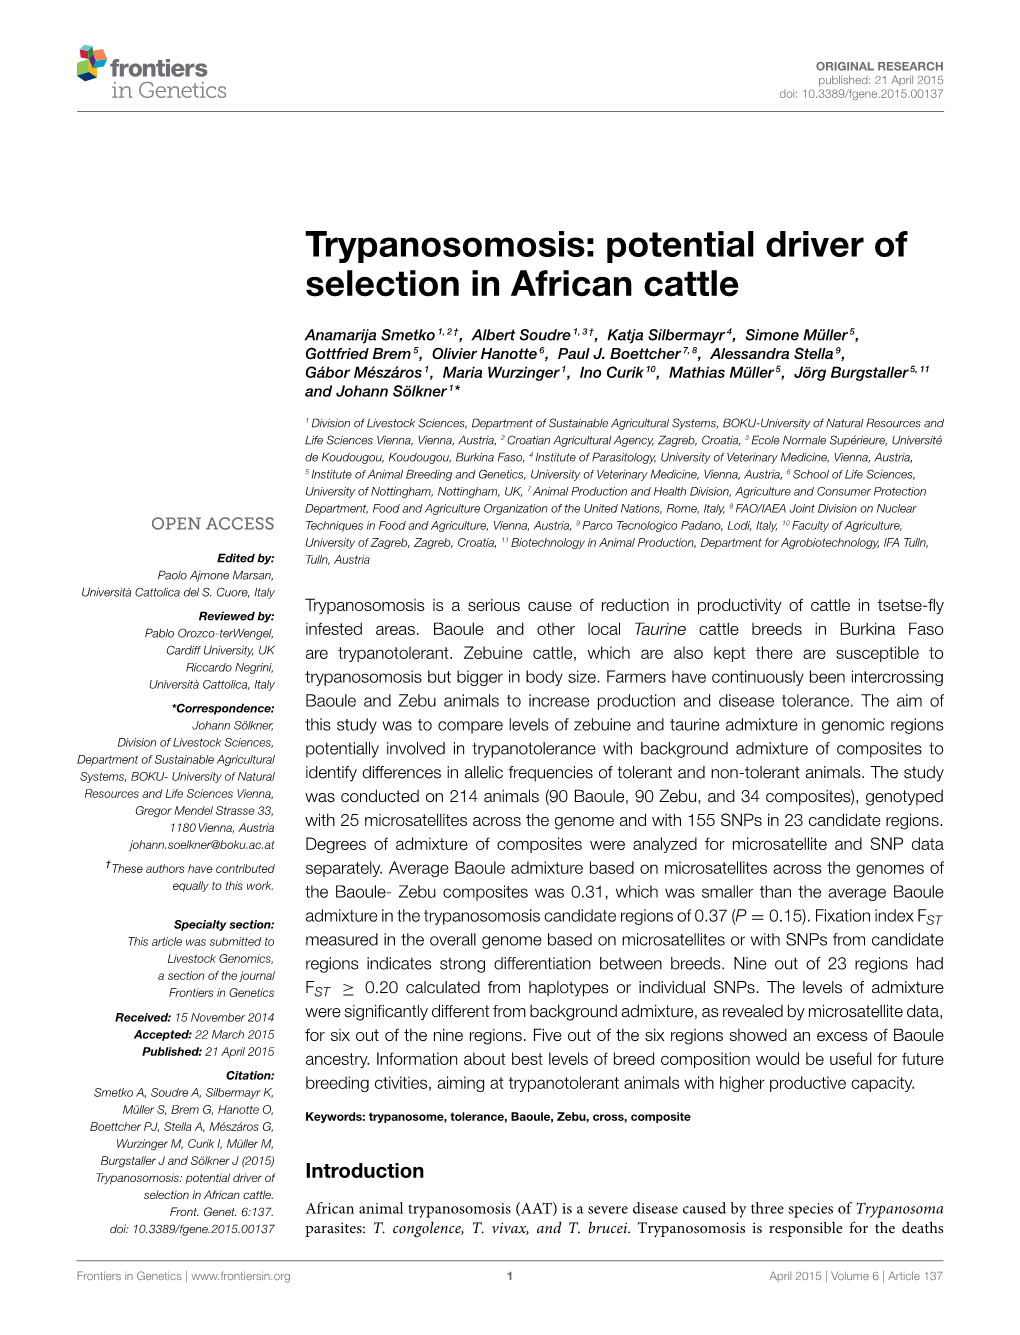 Trypanosomosis: Potential Driver of Selection in African Cattle